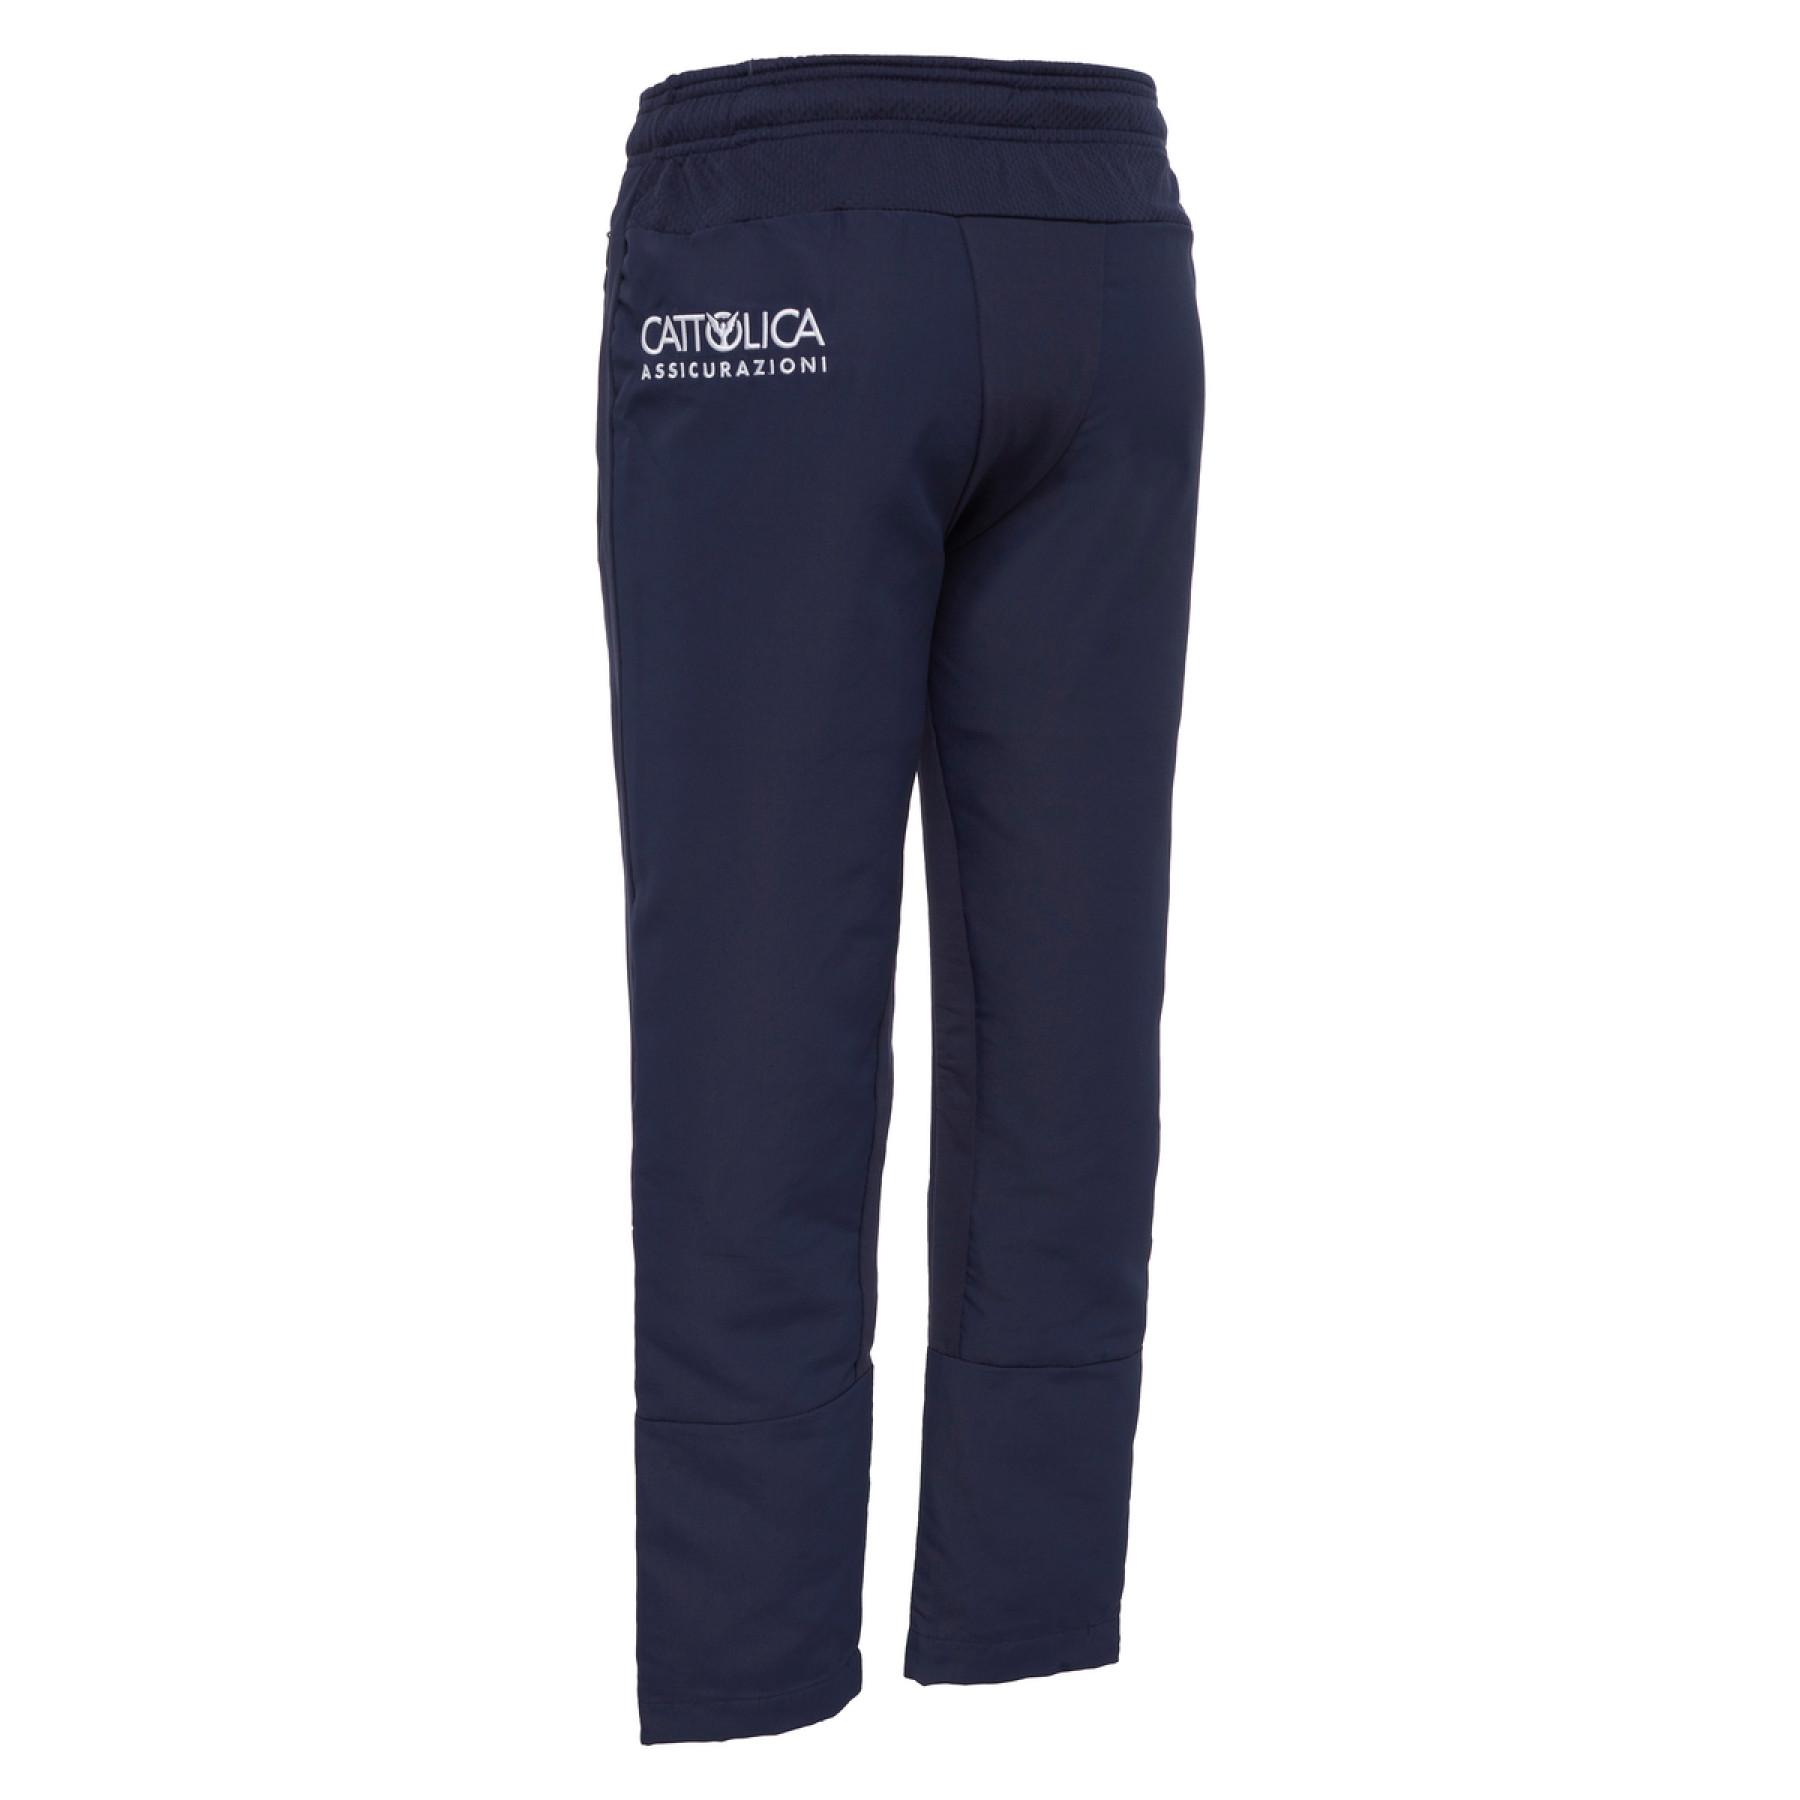 Children's travel trousers Italie rubgy 2020/21